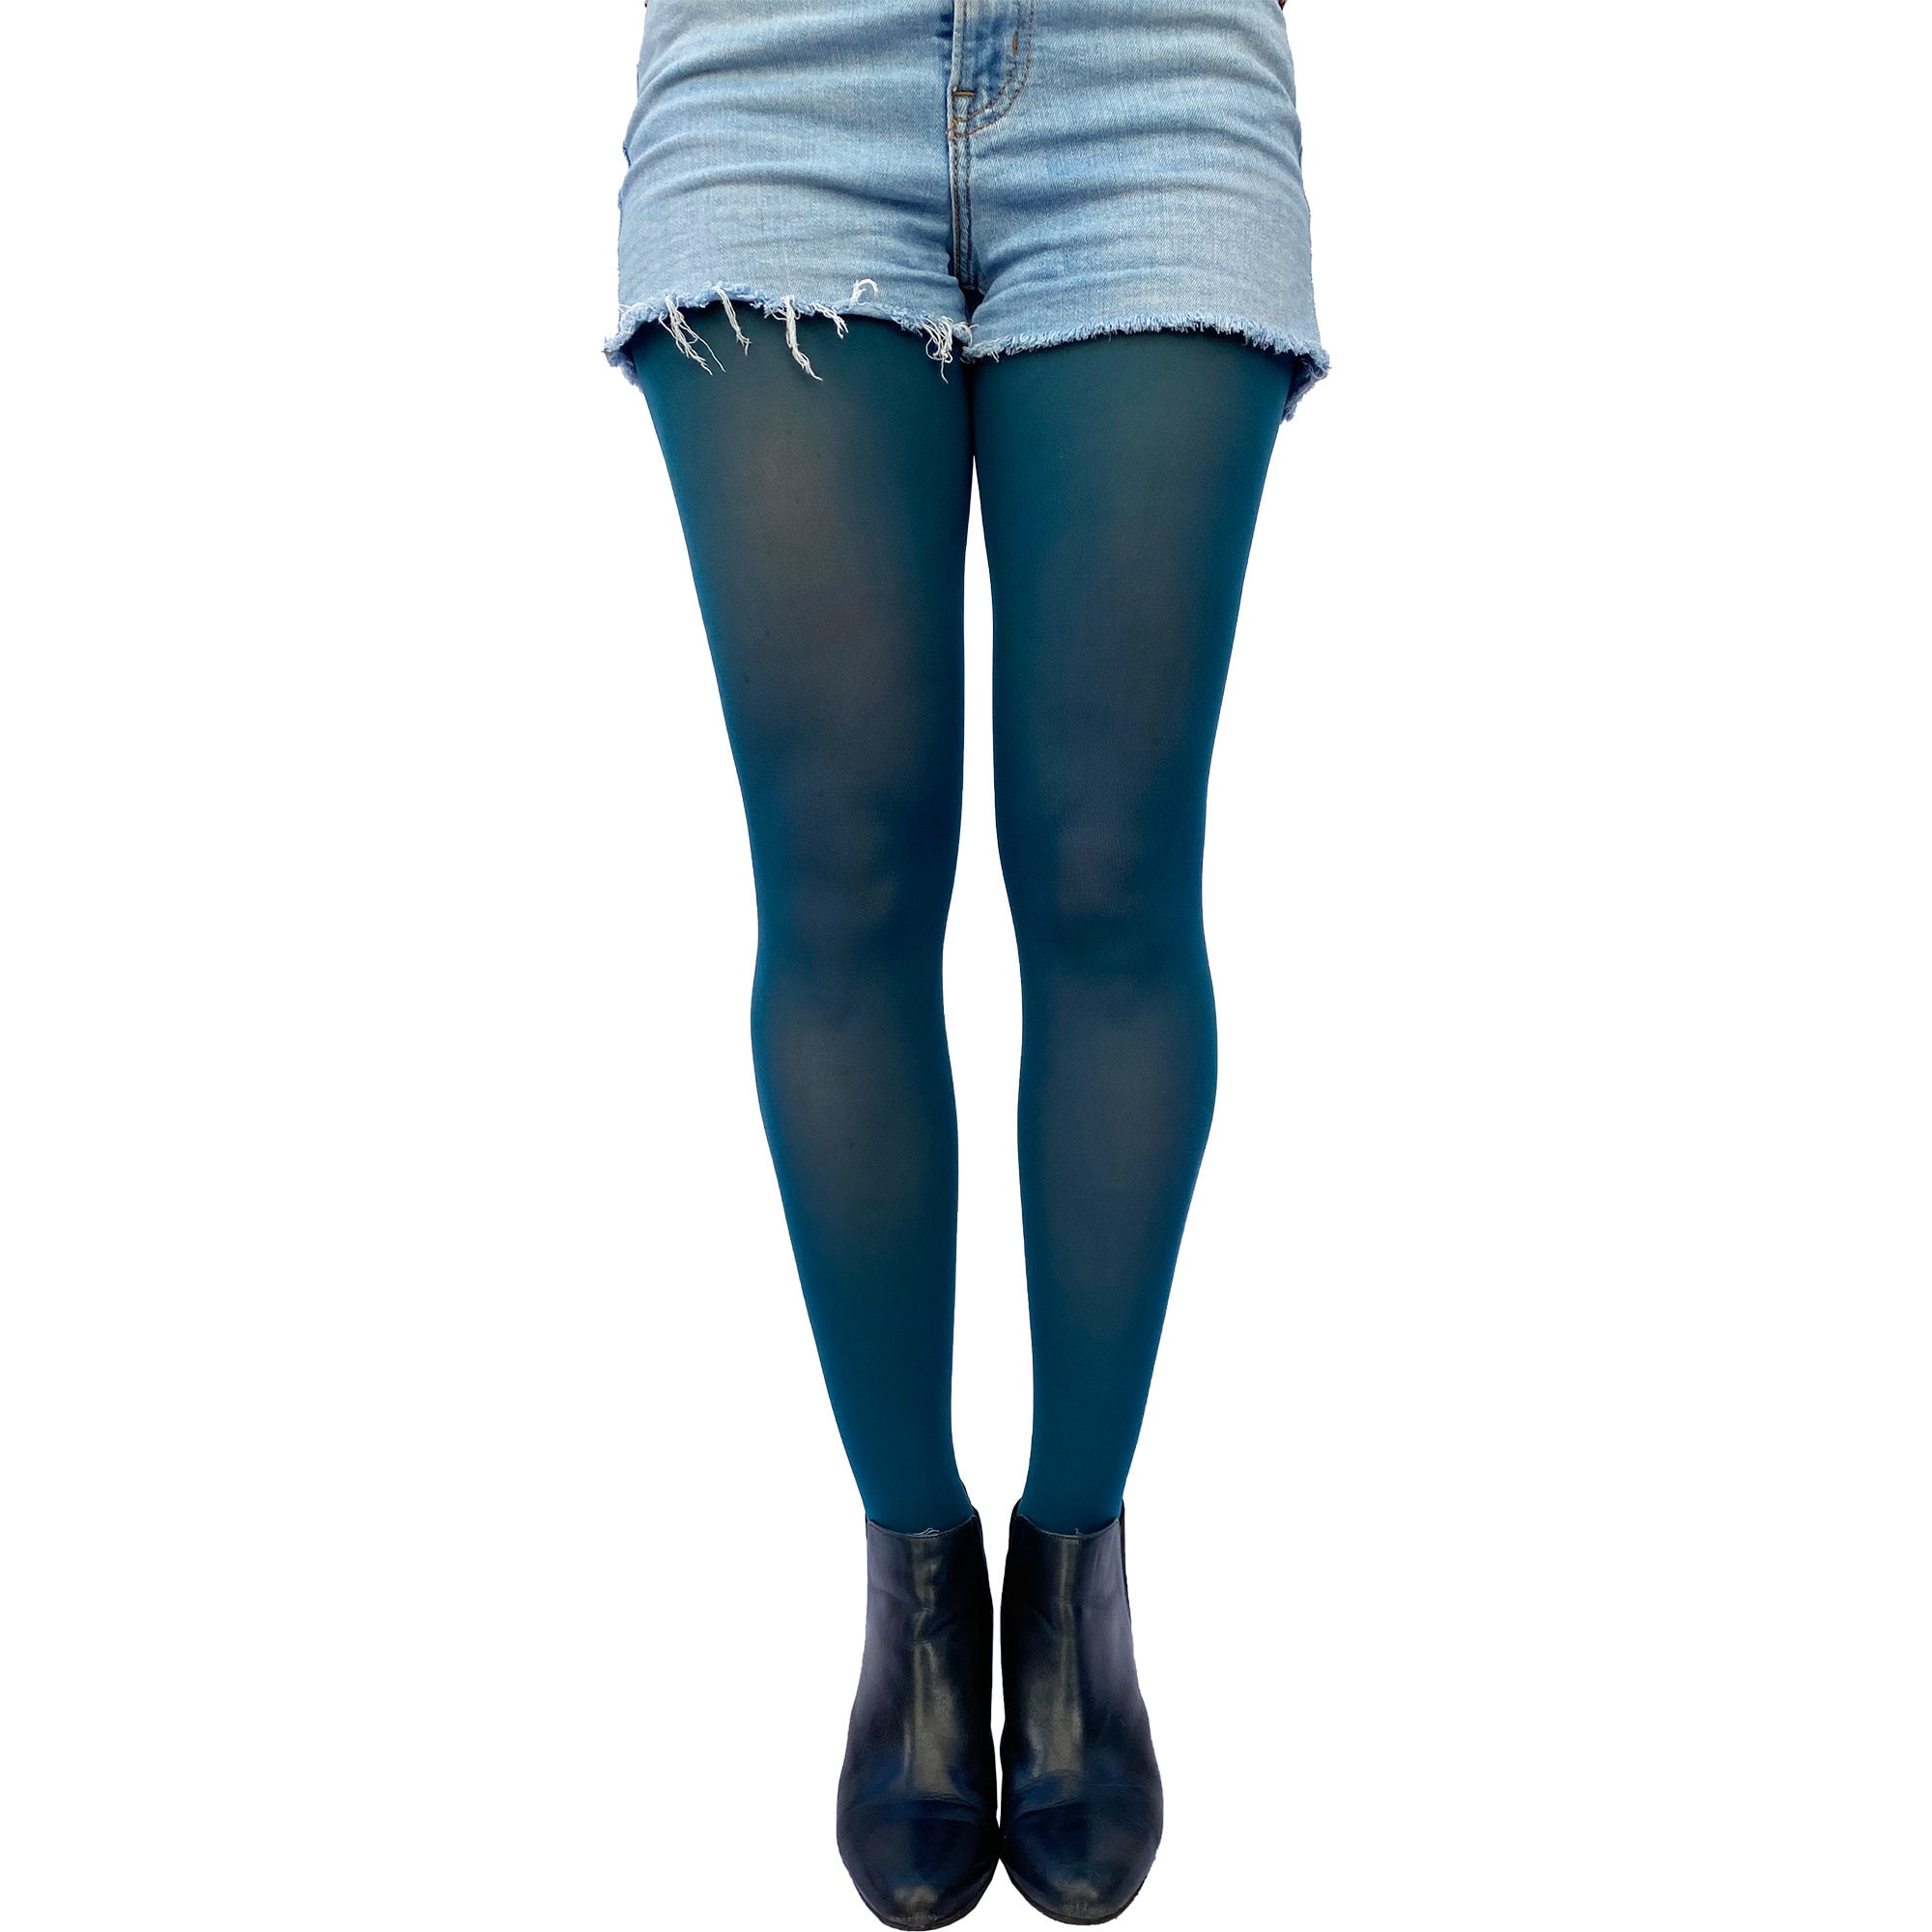 Teal Tights for Women Soft and Durable Opaque Pantyhose Tights Available in  Plus Size -  Canada